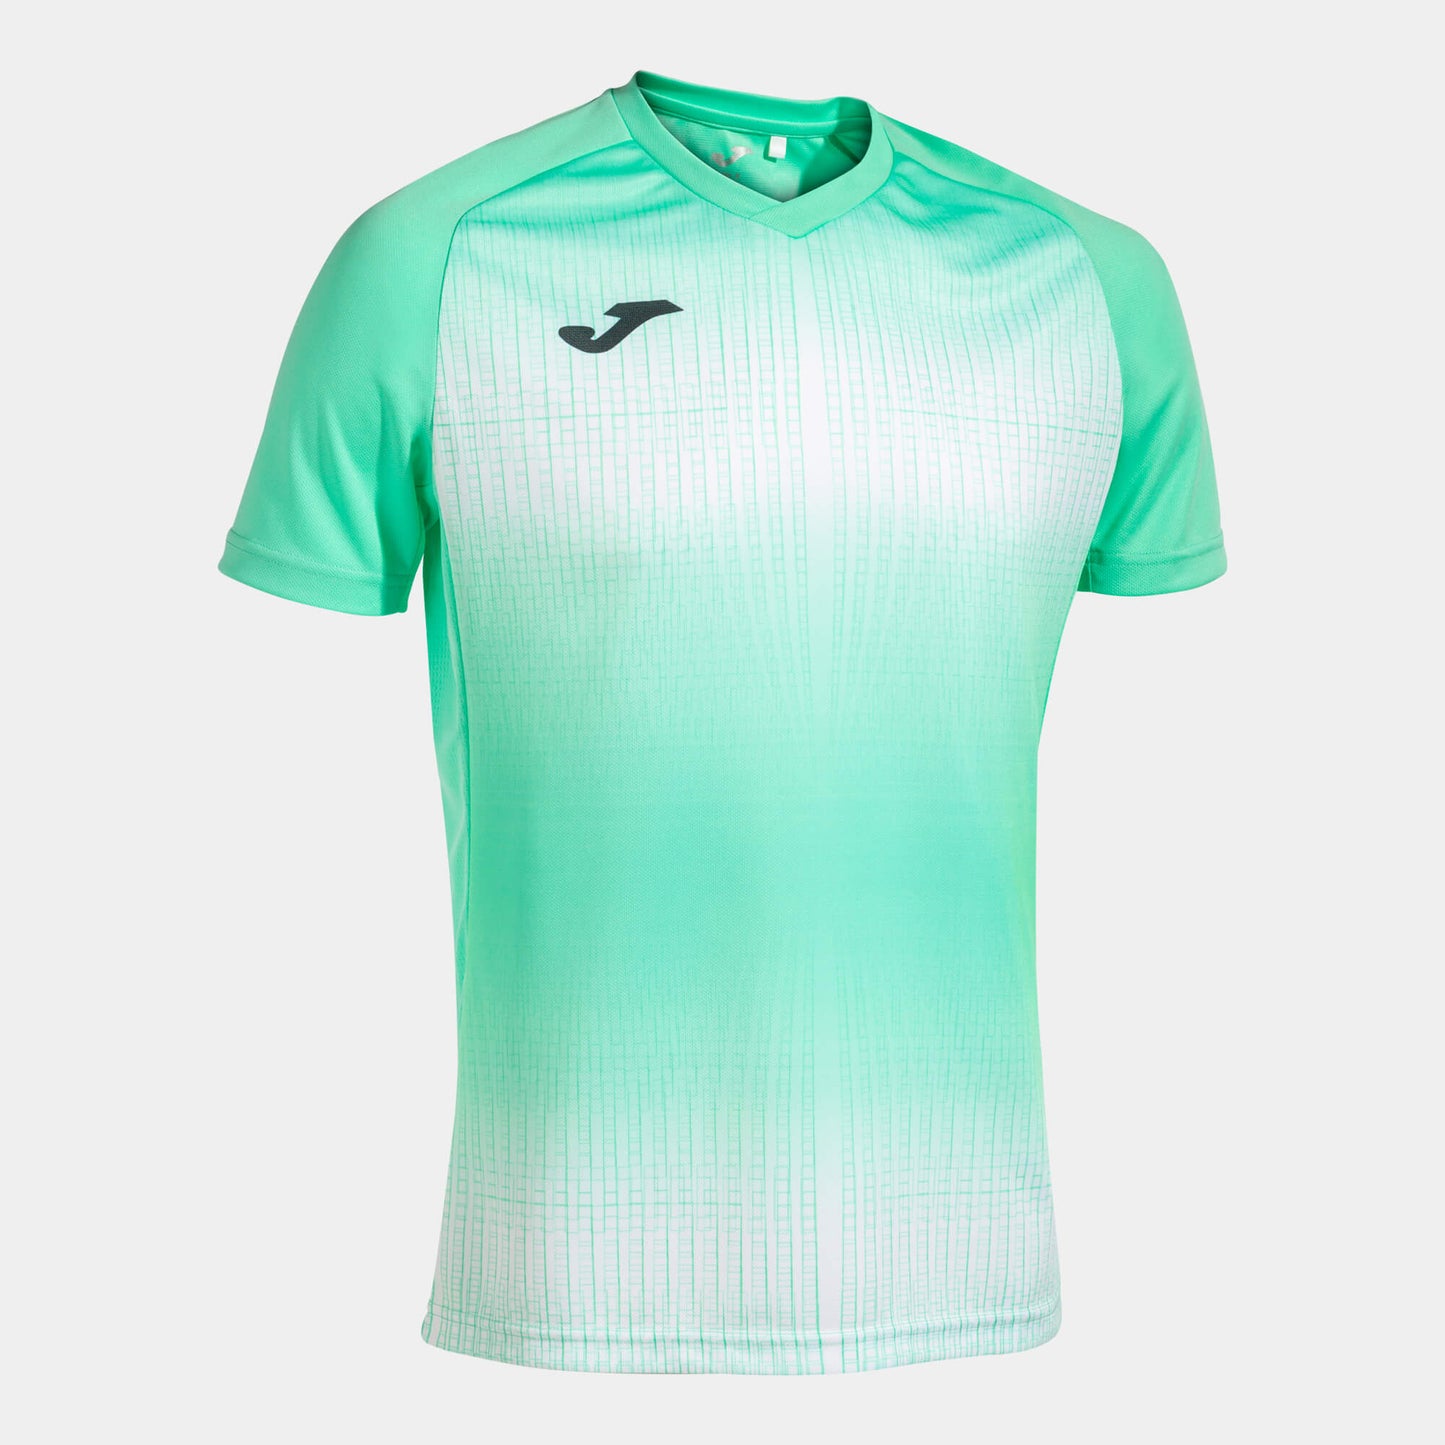 Joma Tiger V Jersey Soft Green-White (Front)